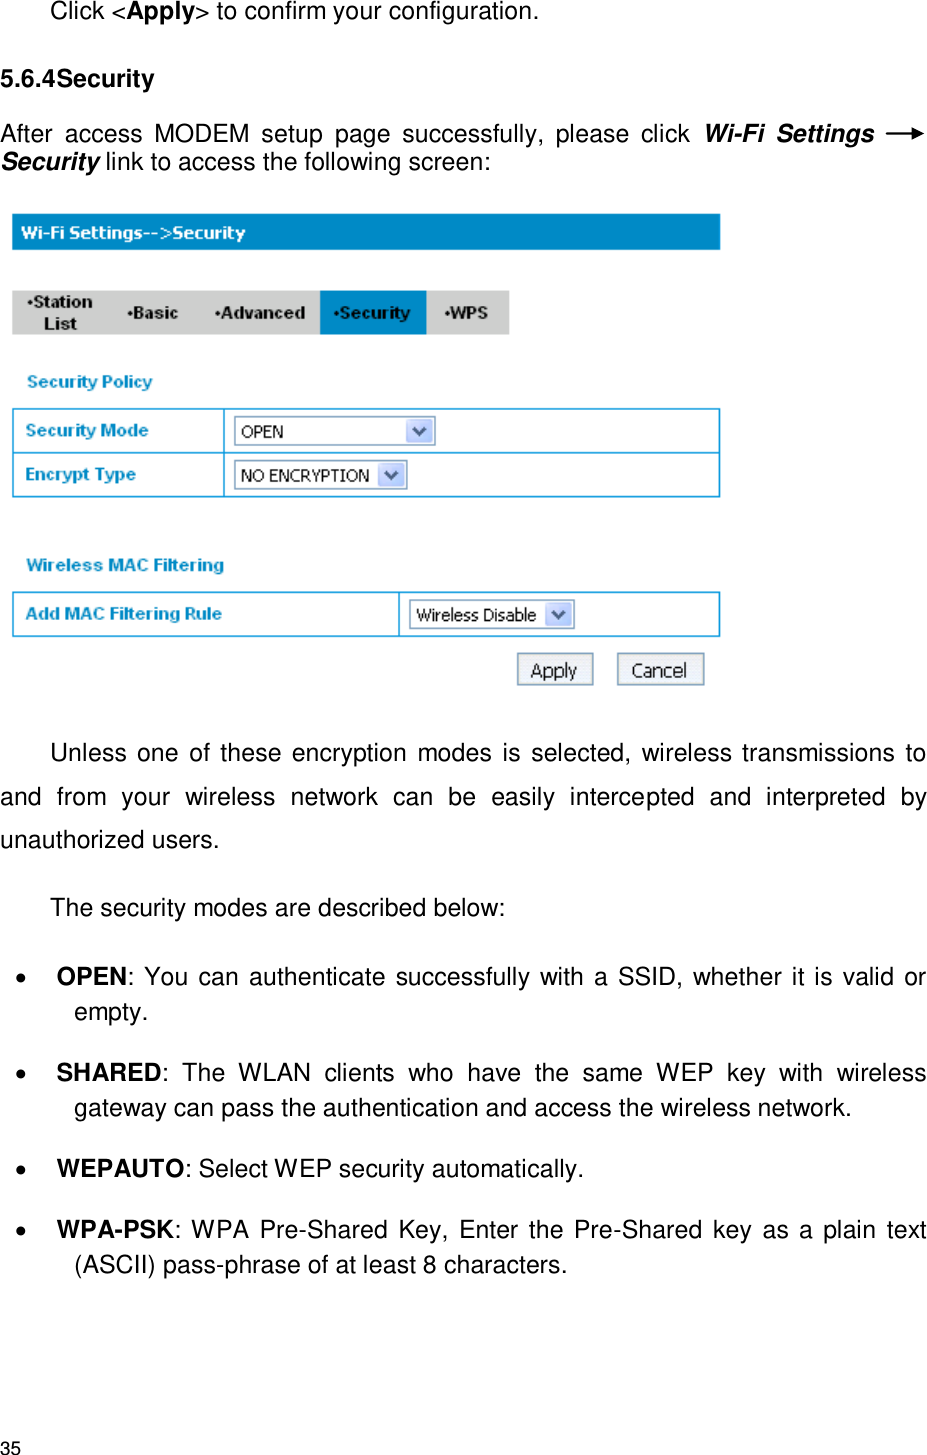 35 Click &lt;Apply&gt; to confirm your configuration. 5.6.4 Security After  access  MODEM  setup  page  successfully,  please  click  Wi-Fi  Settings Security link to access the following screen:  Unless one of these encryption modes is  selected, wireless transmissions to and  from  your  wireless  network  can  be  easily  intercepted  and  interpreted  by unauthorized users. The security modes are described below:  OPEN: You can authenticate successfully with a SSID, whether it is valid or empty.    SHARED:  The  WLAN  clients  who  have  the  same  WEP  key  with  wireless gateway can pass the authentication and access the wireless network.  WEPAUTO: Select WEP security automatically.  WPA-PSK: WPA Pre-Shared Key, Enter the Pre-Shared key as a plain text (ASCII) pass-phrase of at least 8 characters. 